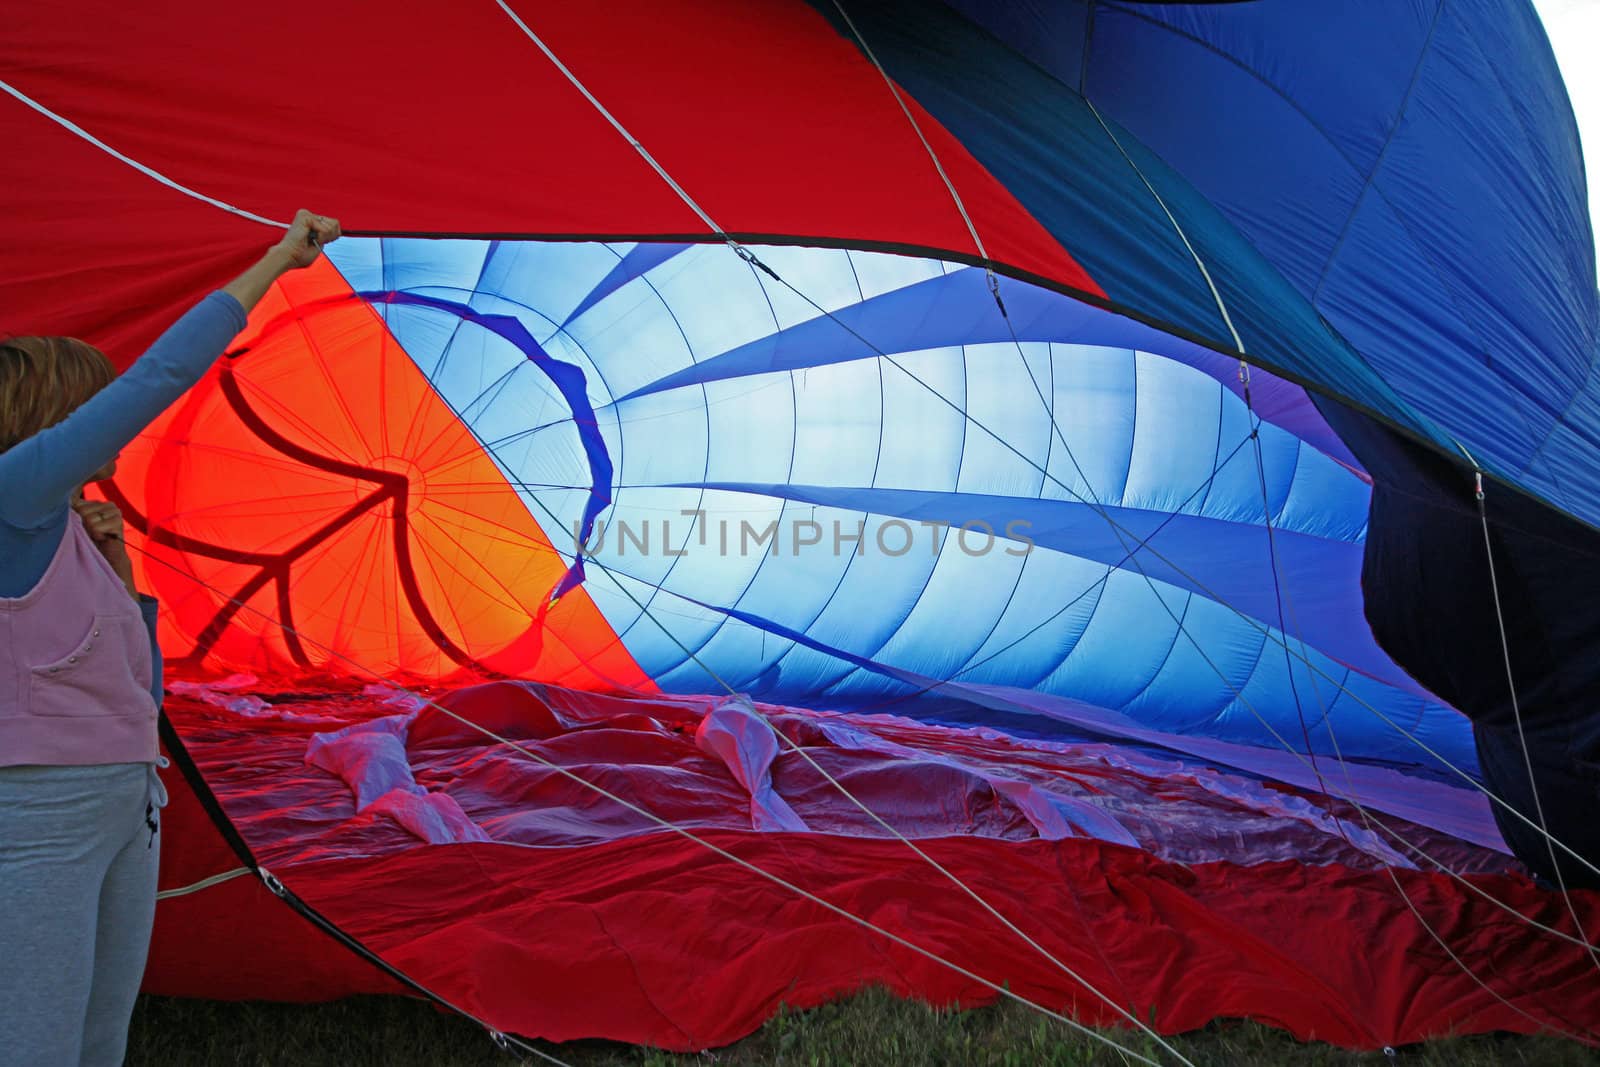 View inside a balloon being filled with hot air